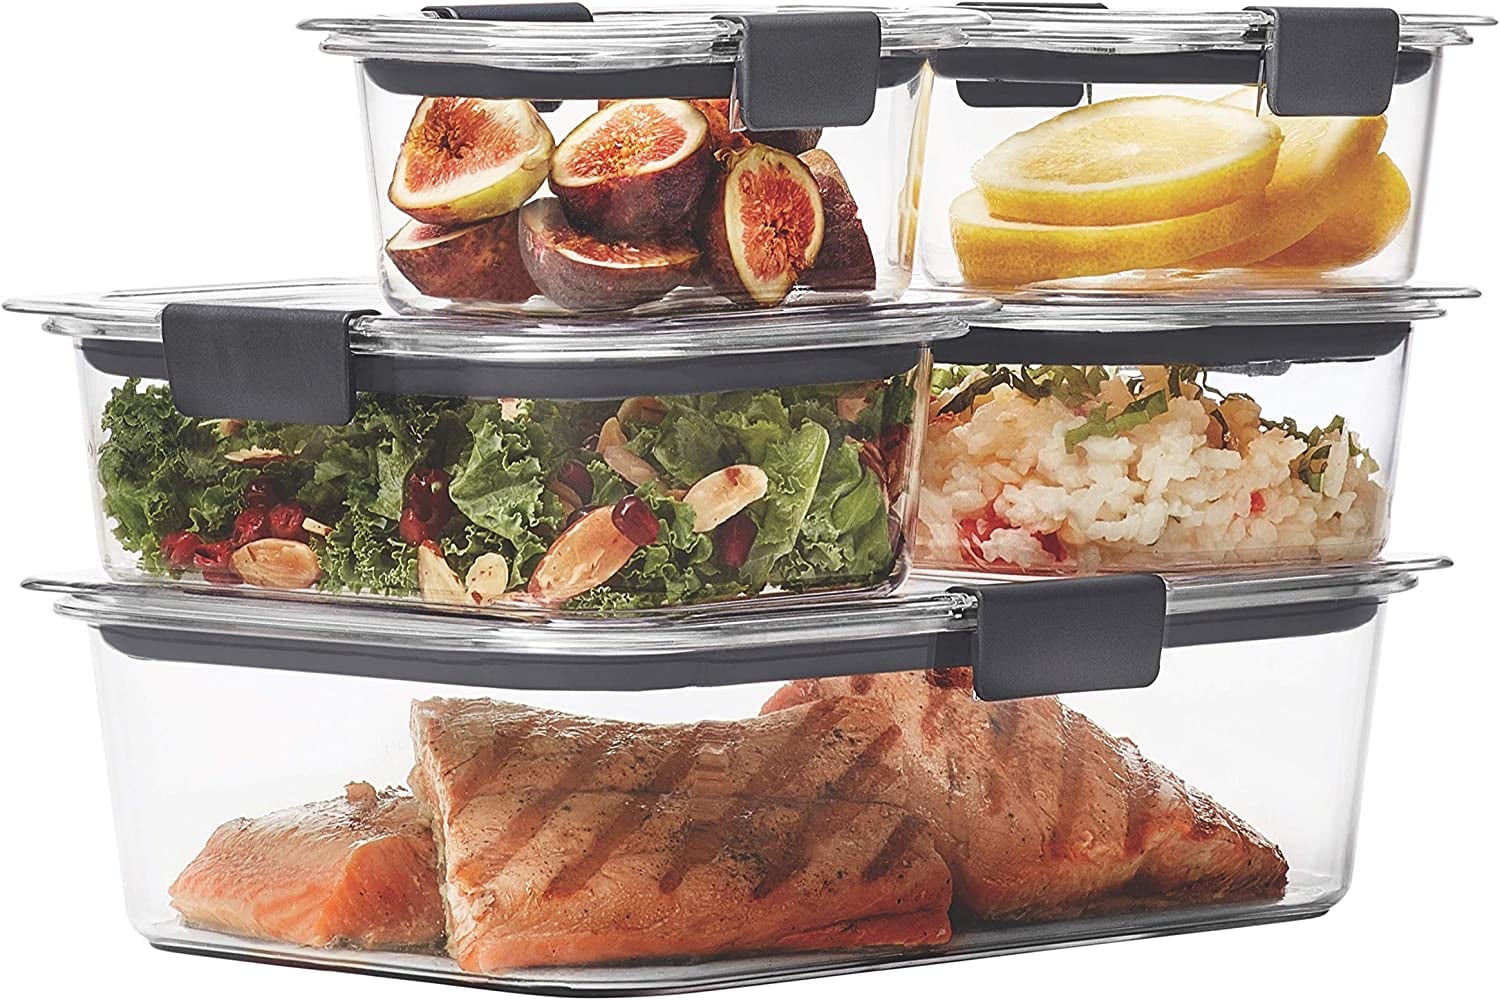 Top 10 Best Glass Food Storage Containers in 2022 - Review